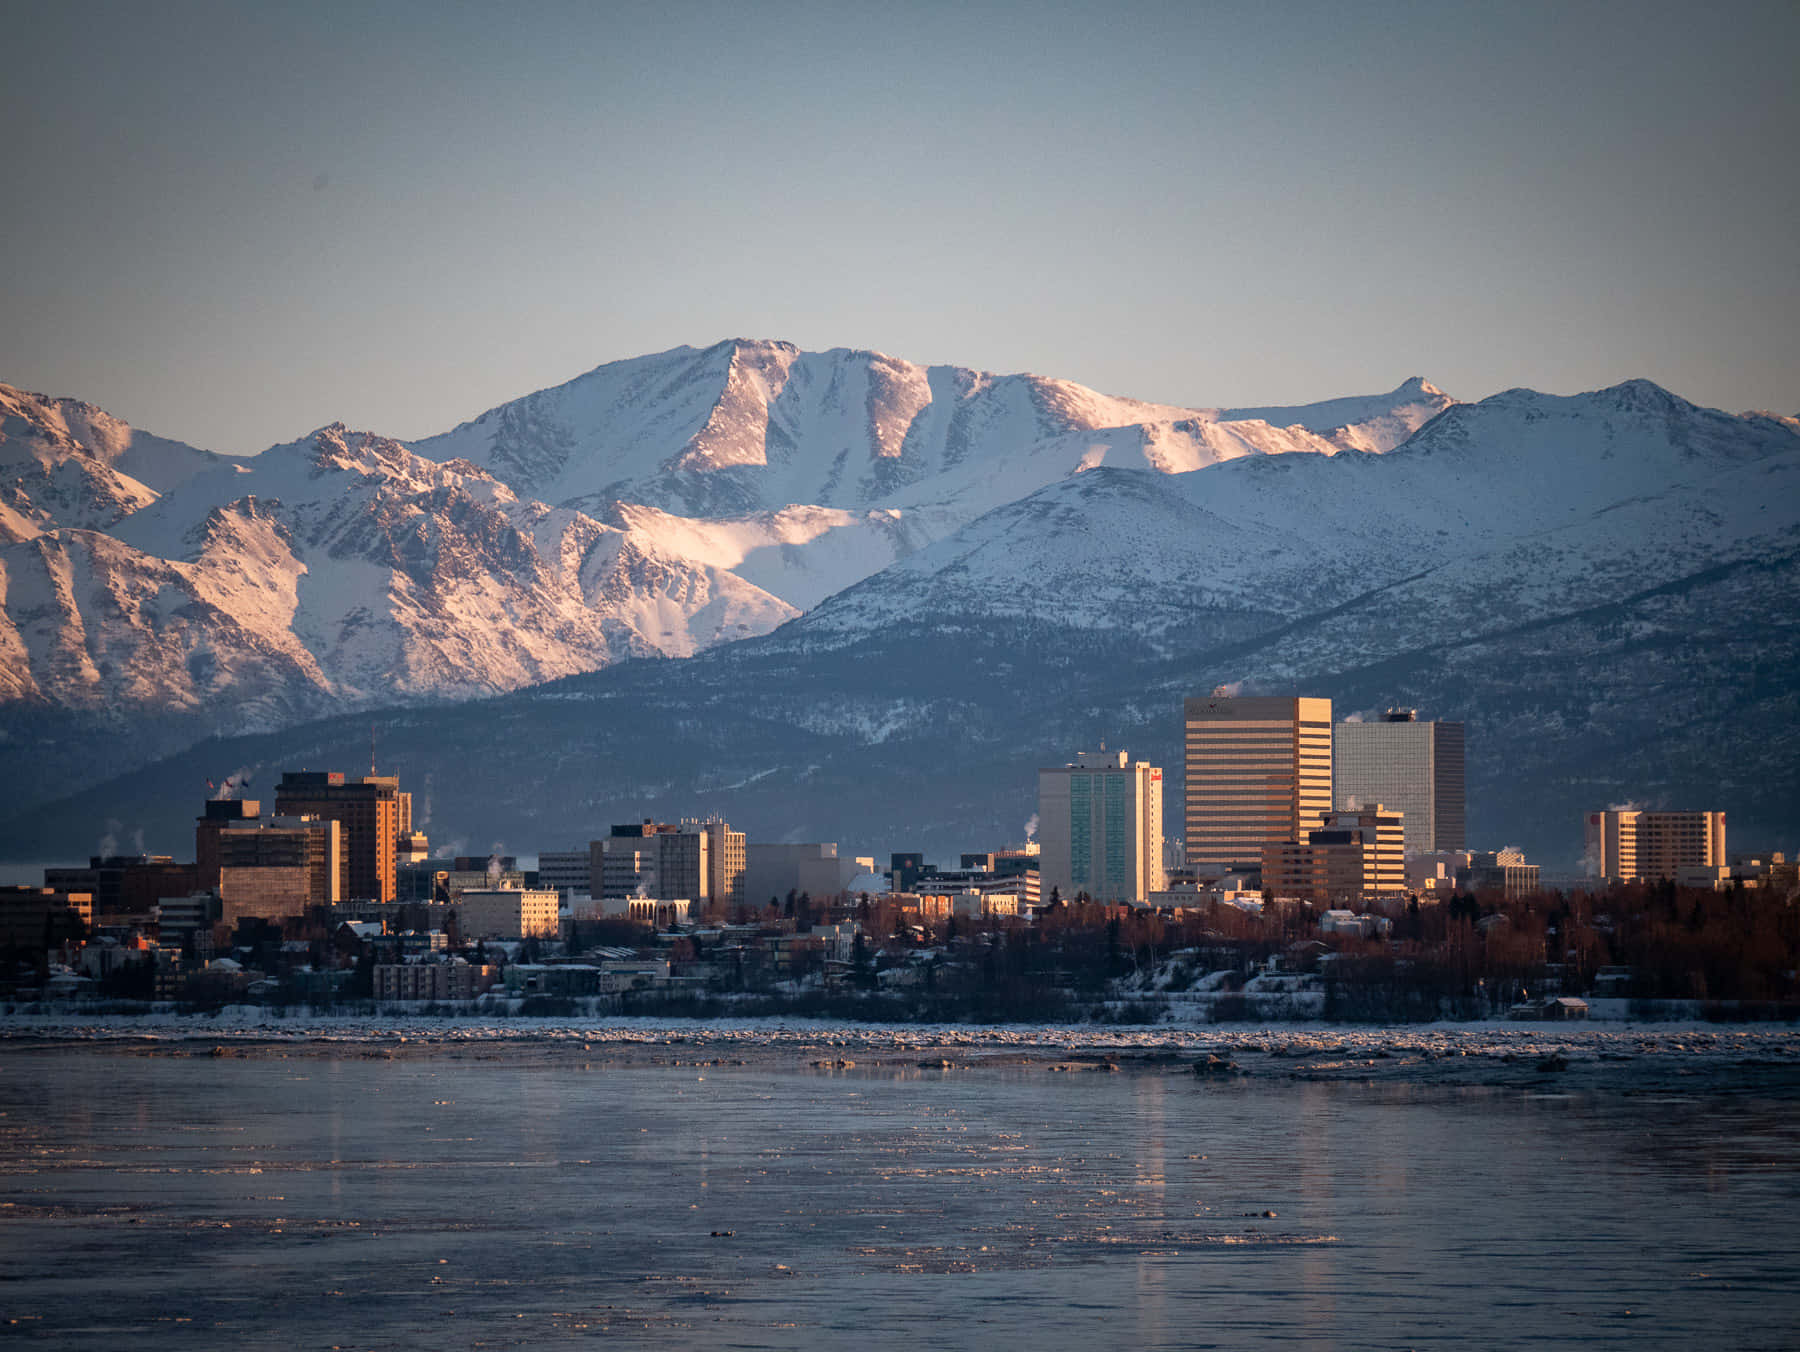 Anchorage Alaska City In Snowy Mountains Picture